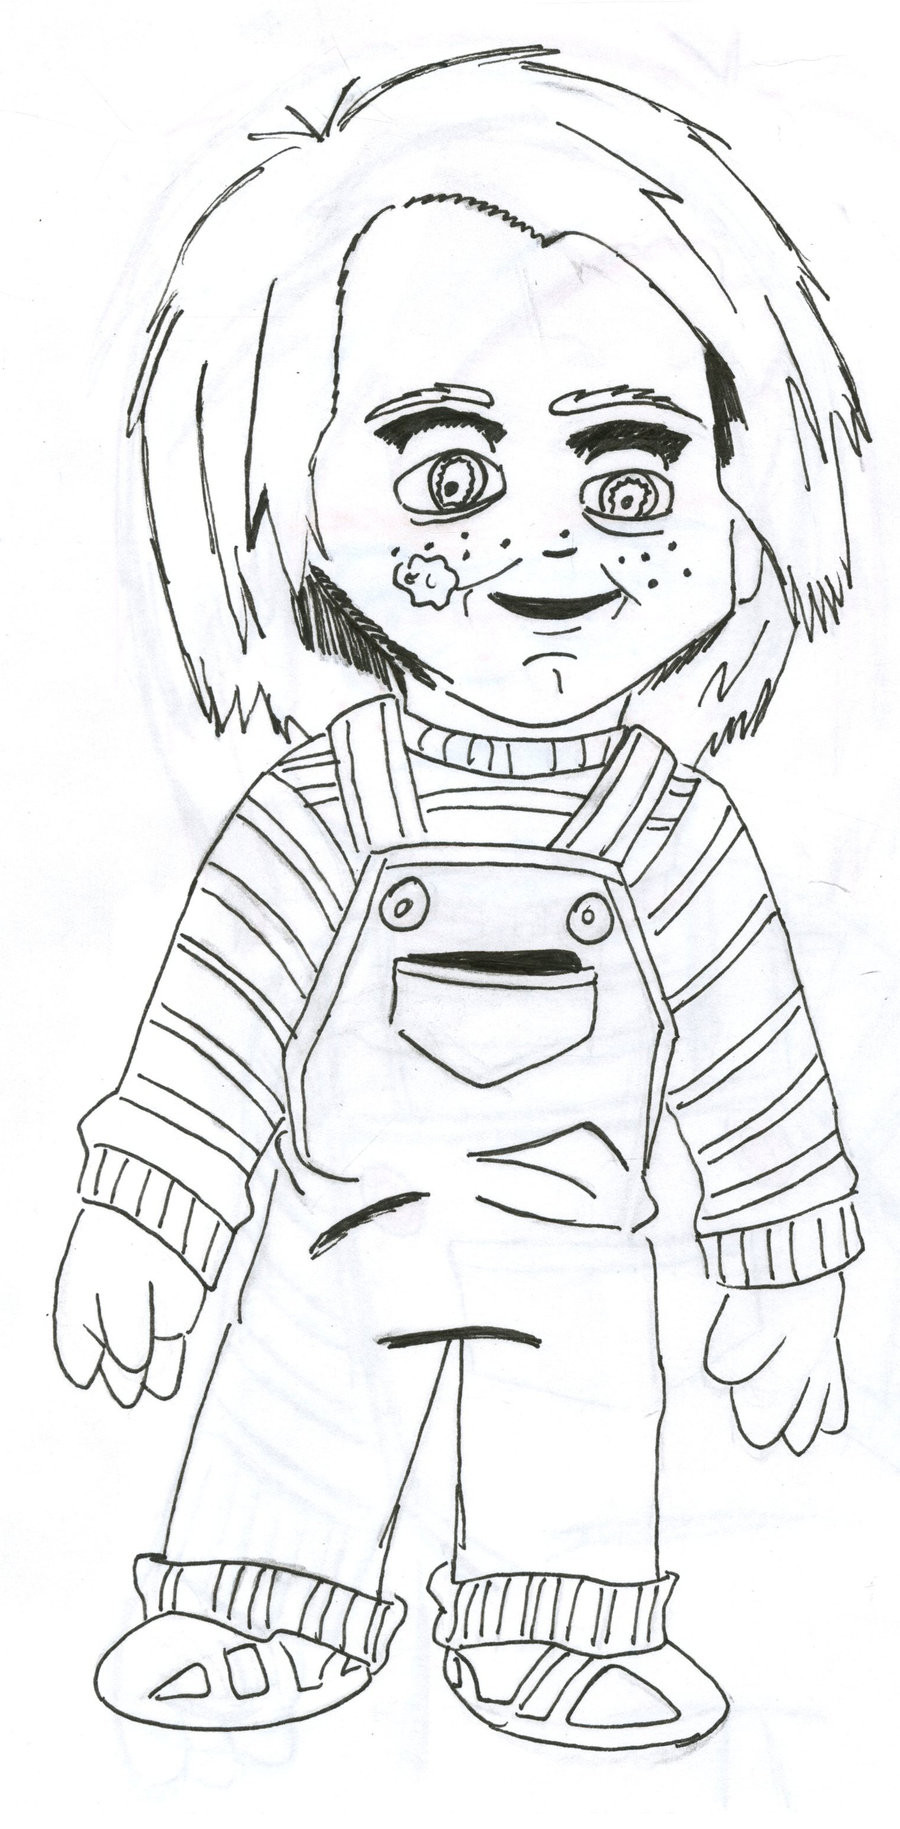 Chucky Coloring Pages
 Chucky And Tiffany Free Coloring Pages